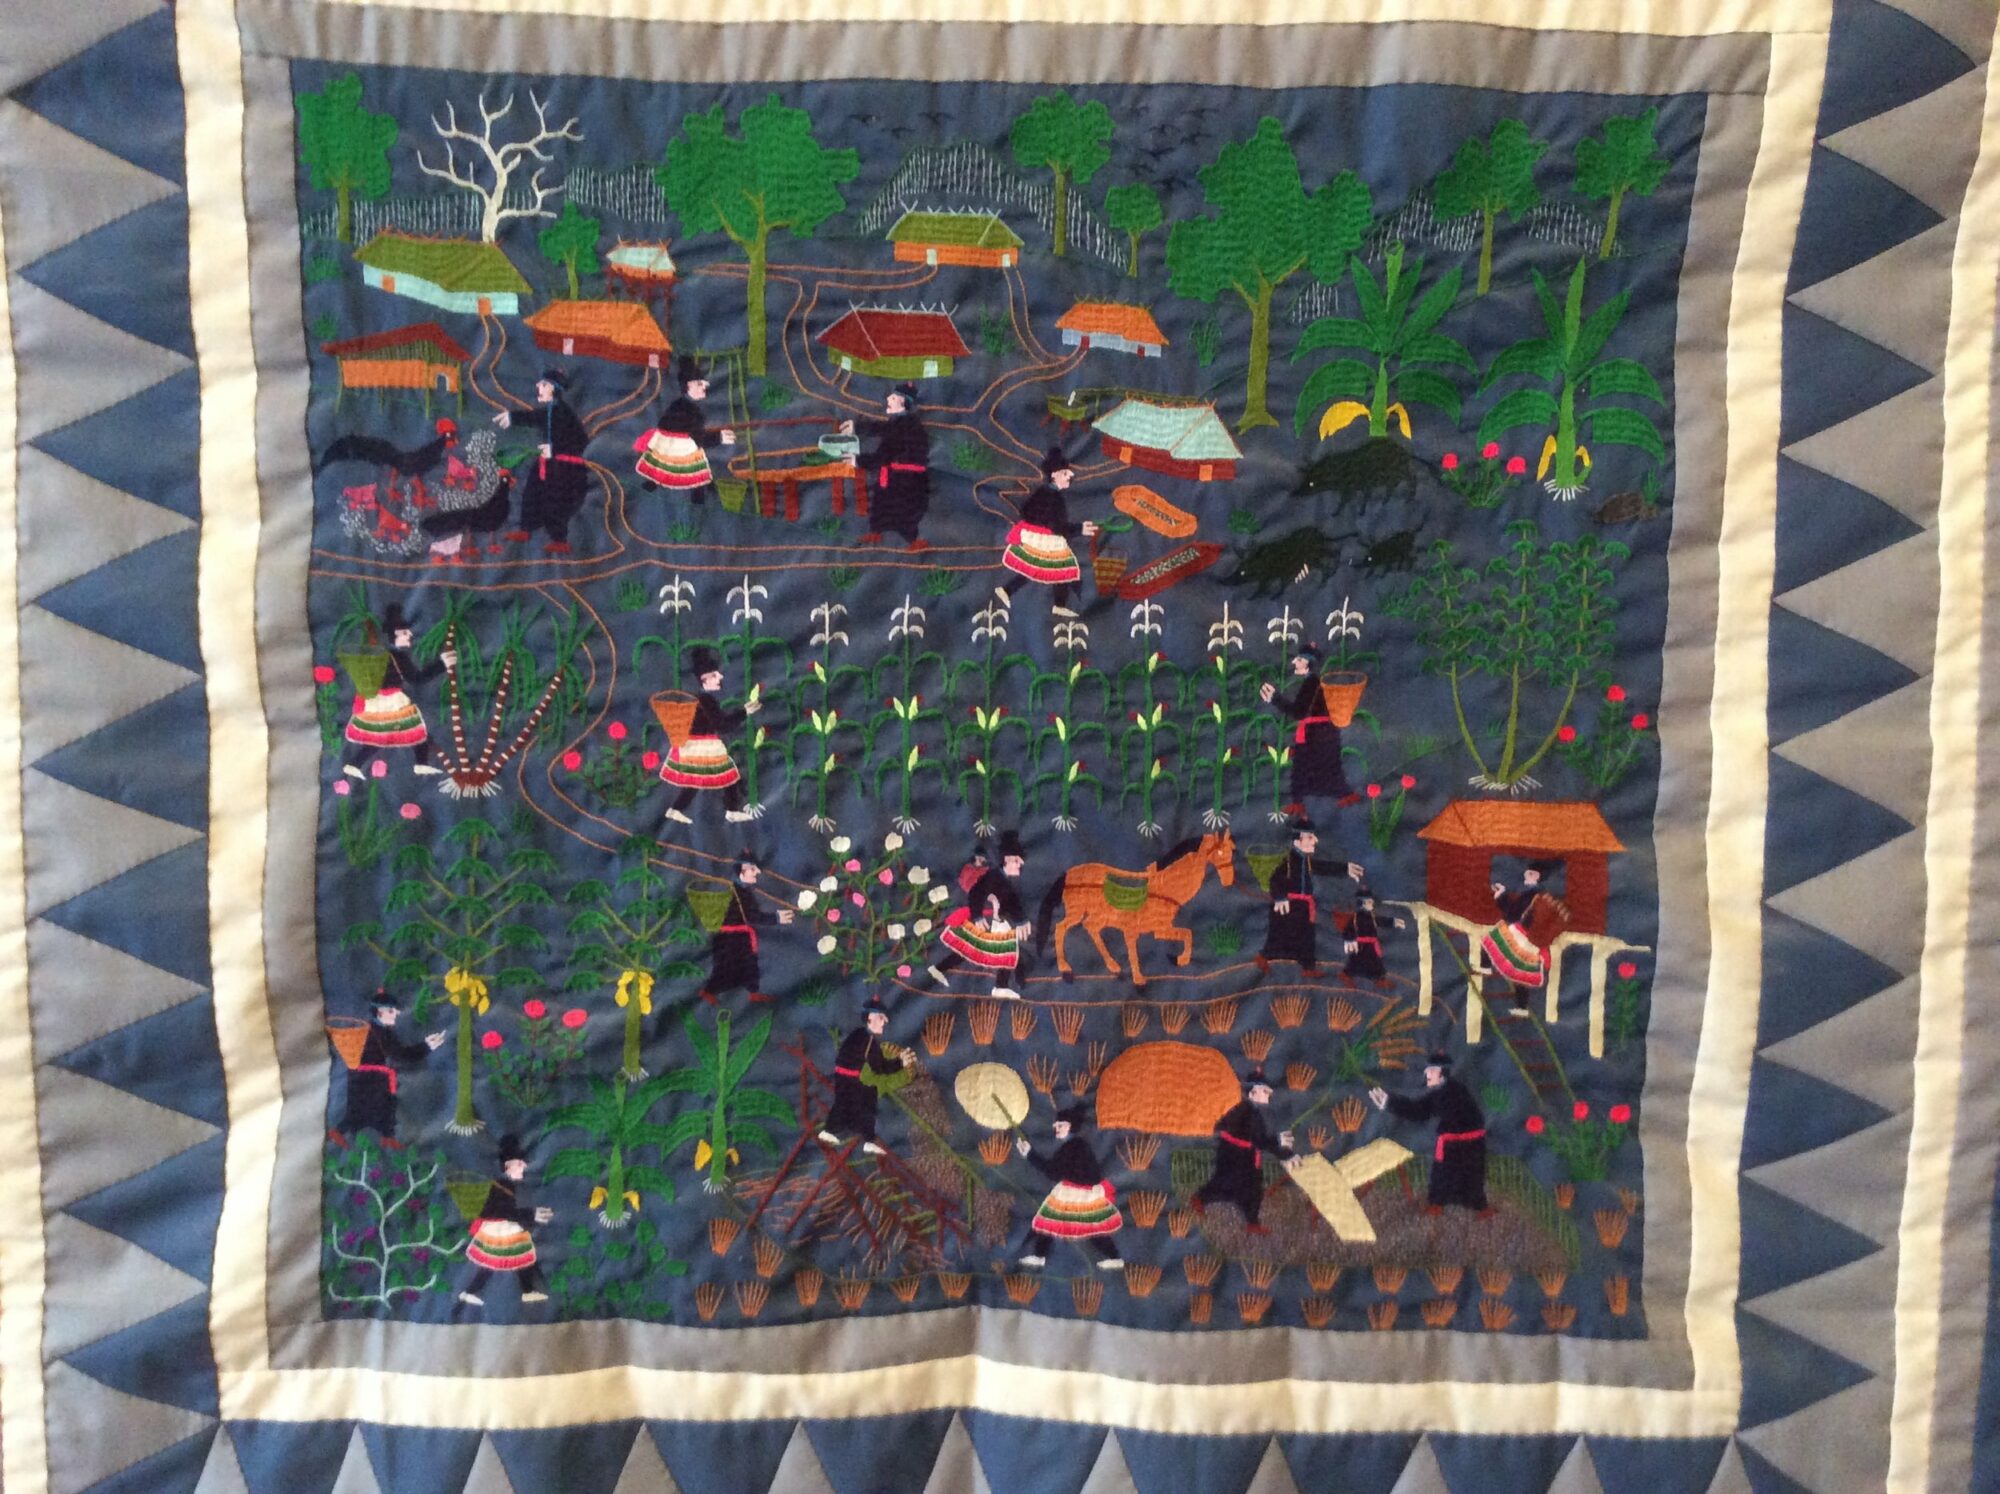 Hmong tapestry depicting farming in the homeland